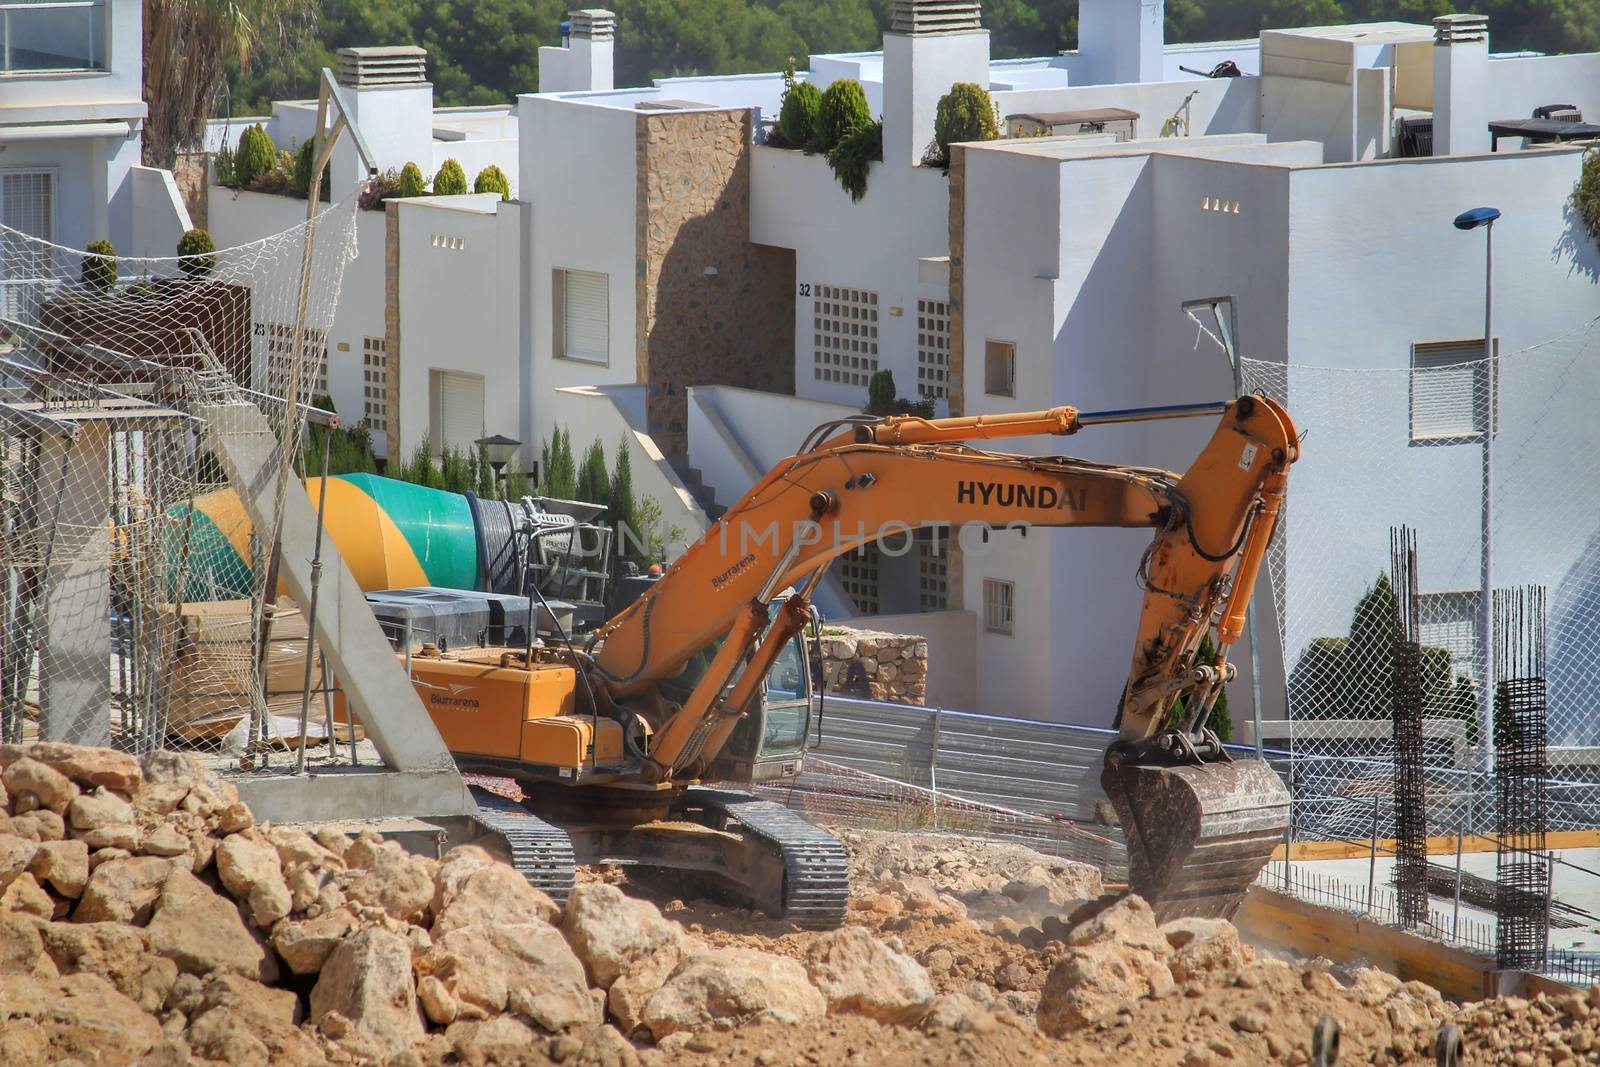 Alicante, Spain- July 28, 2020: Houses under construction in the urbanization of Gran Alacant in southern Spain